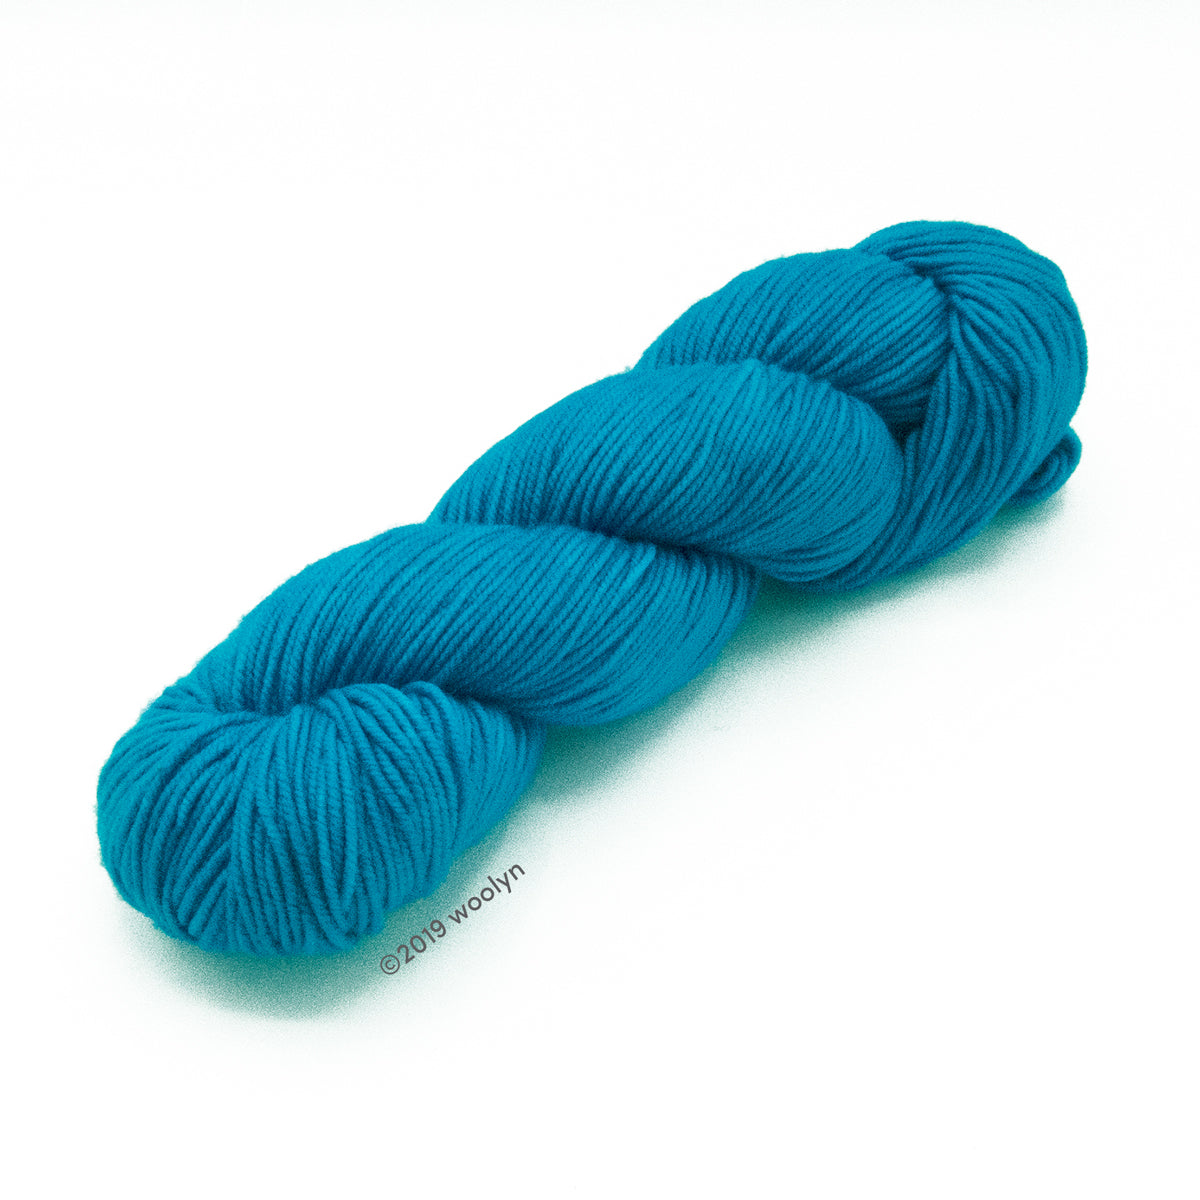 A skein of Knitted Wit Victory DK in Turks and Caicos a bright blue color.